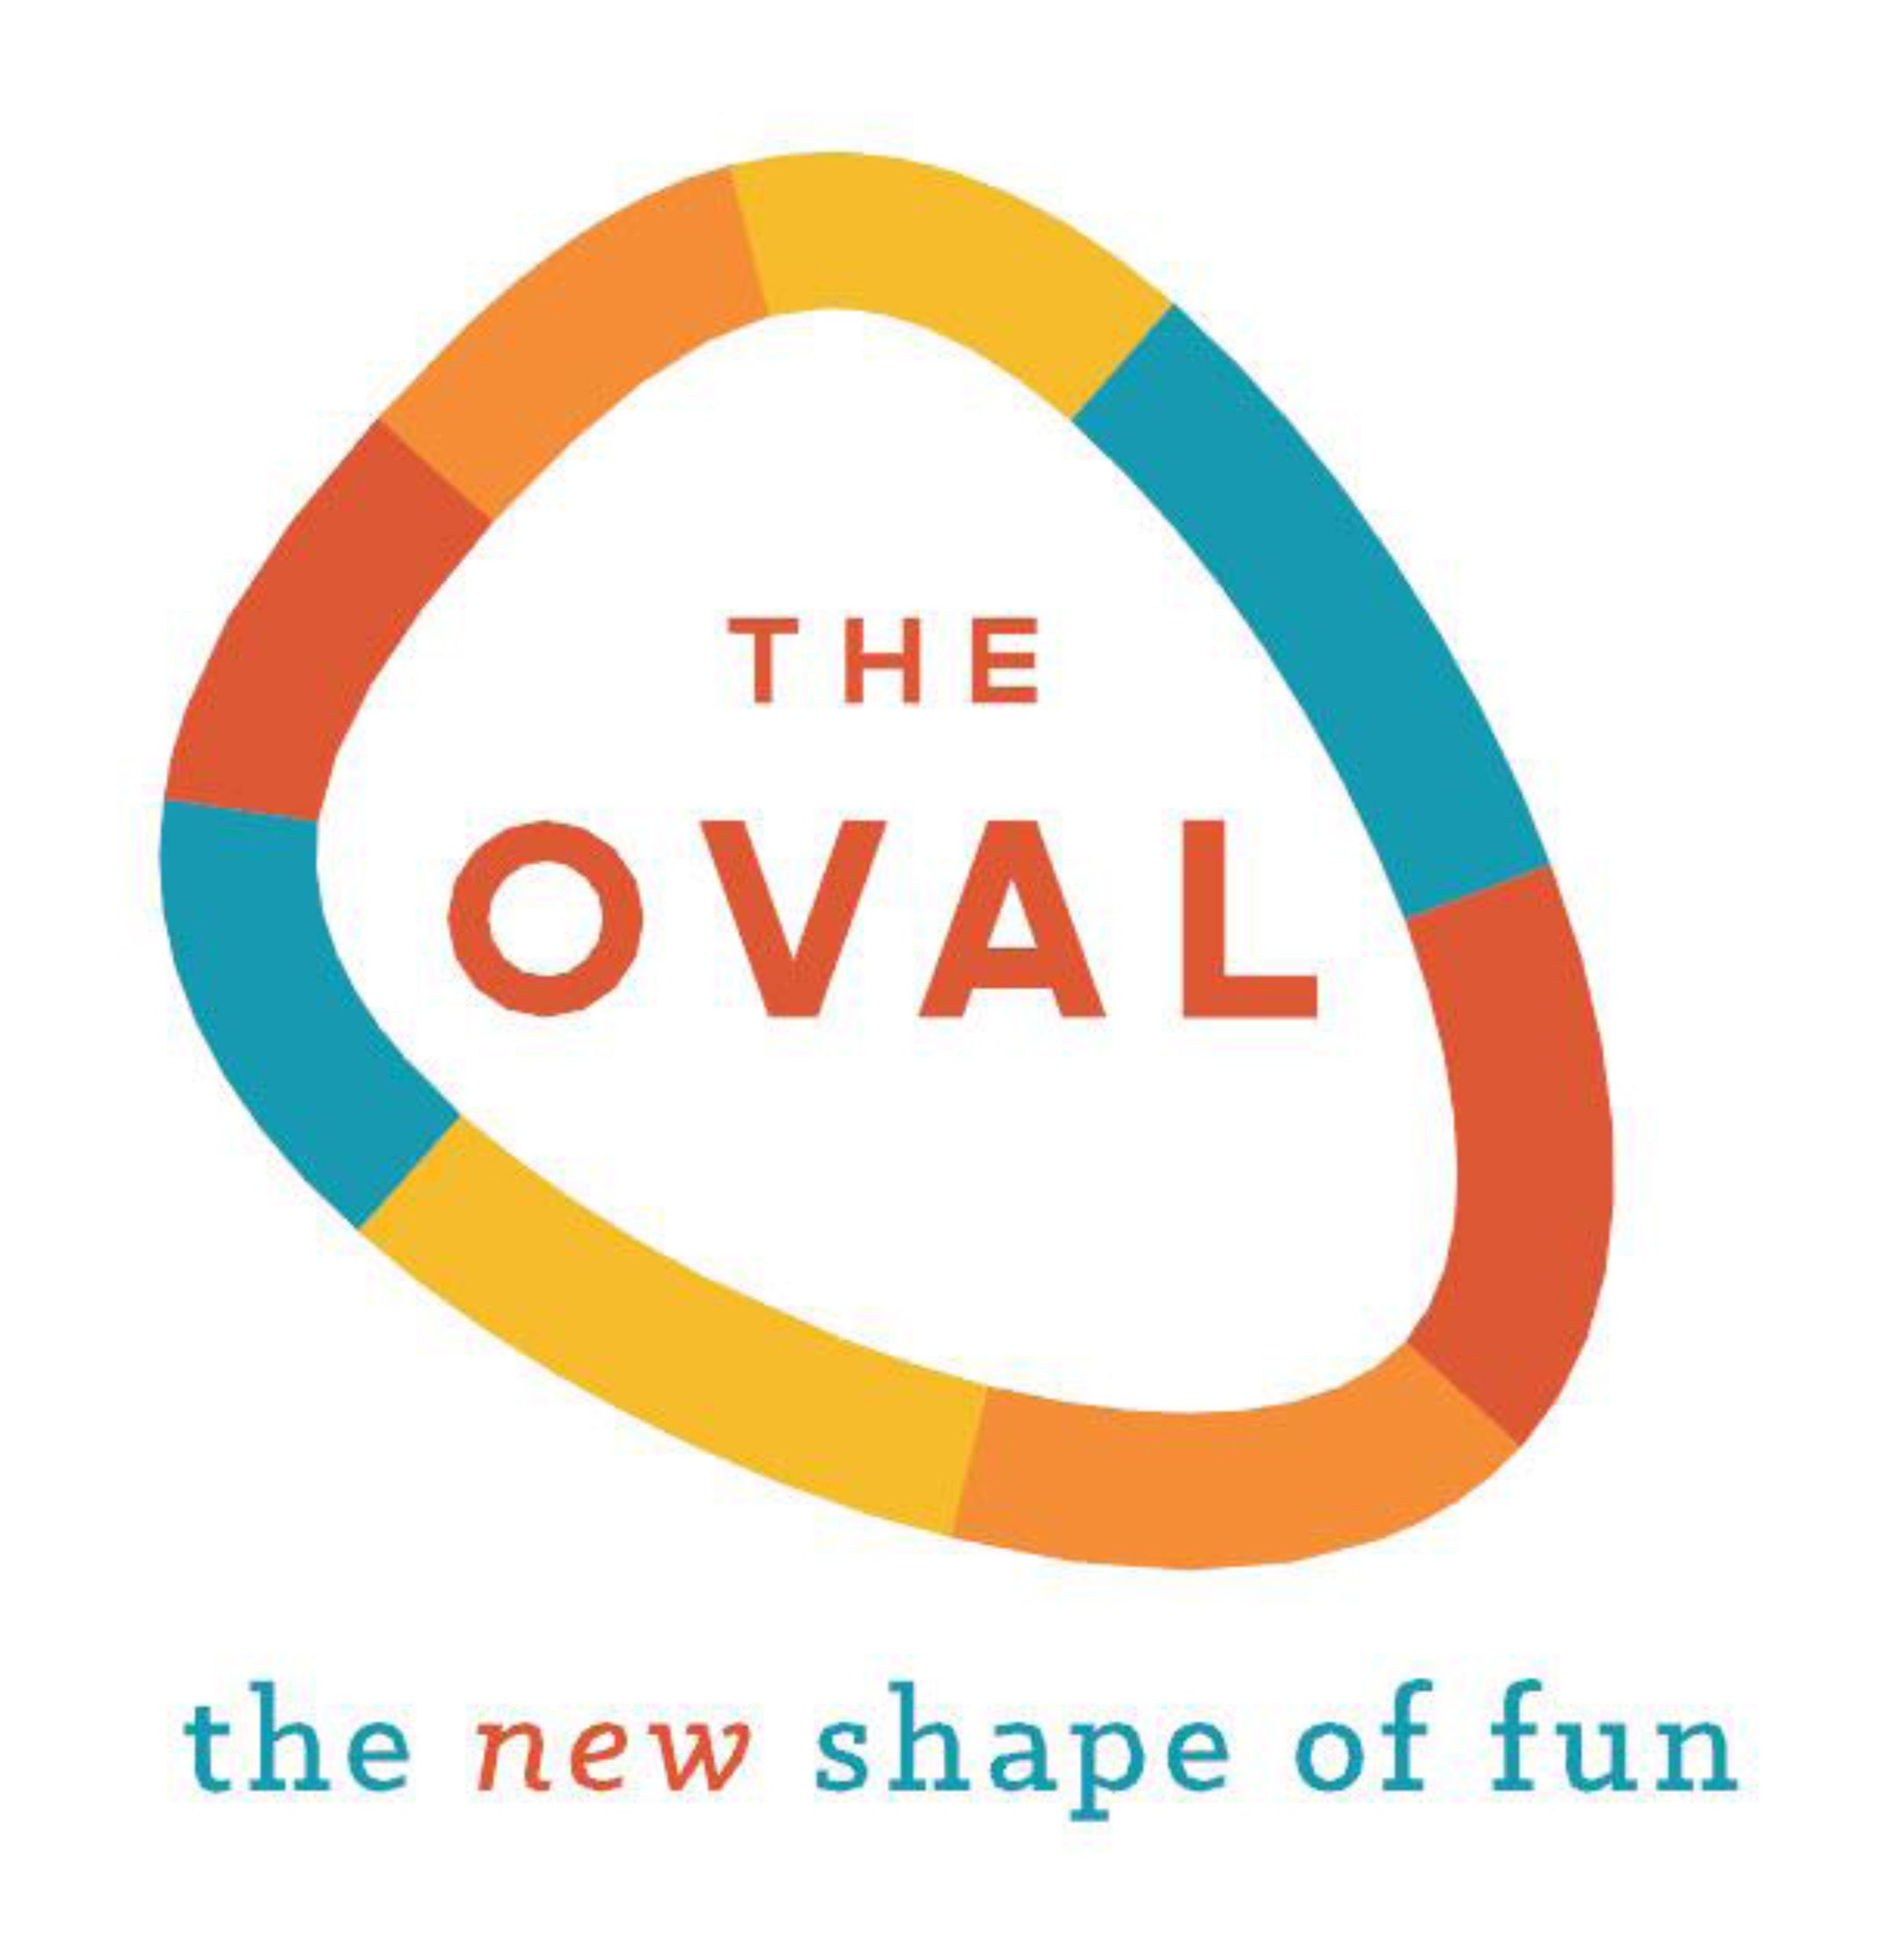 The Oval opens July 17.